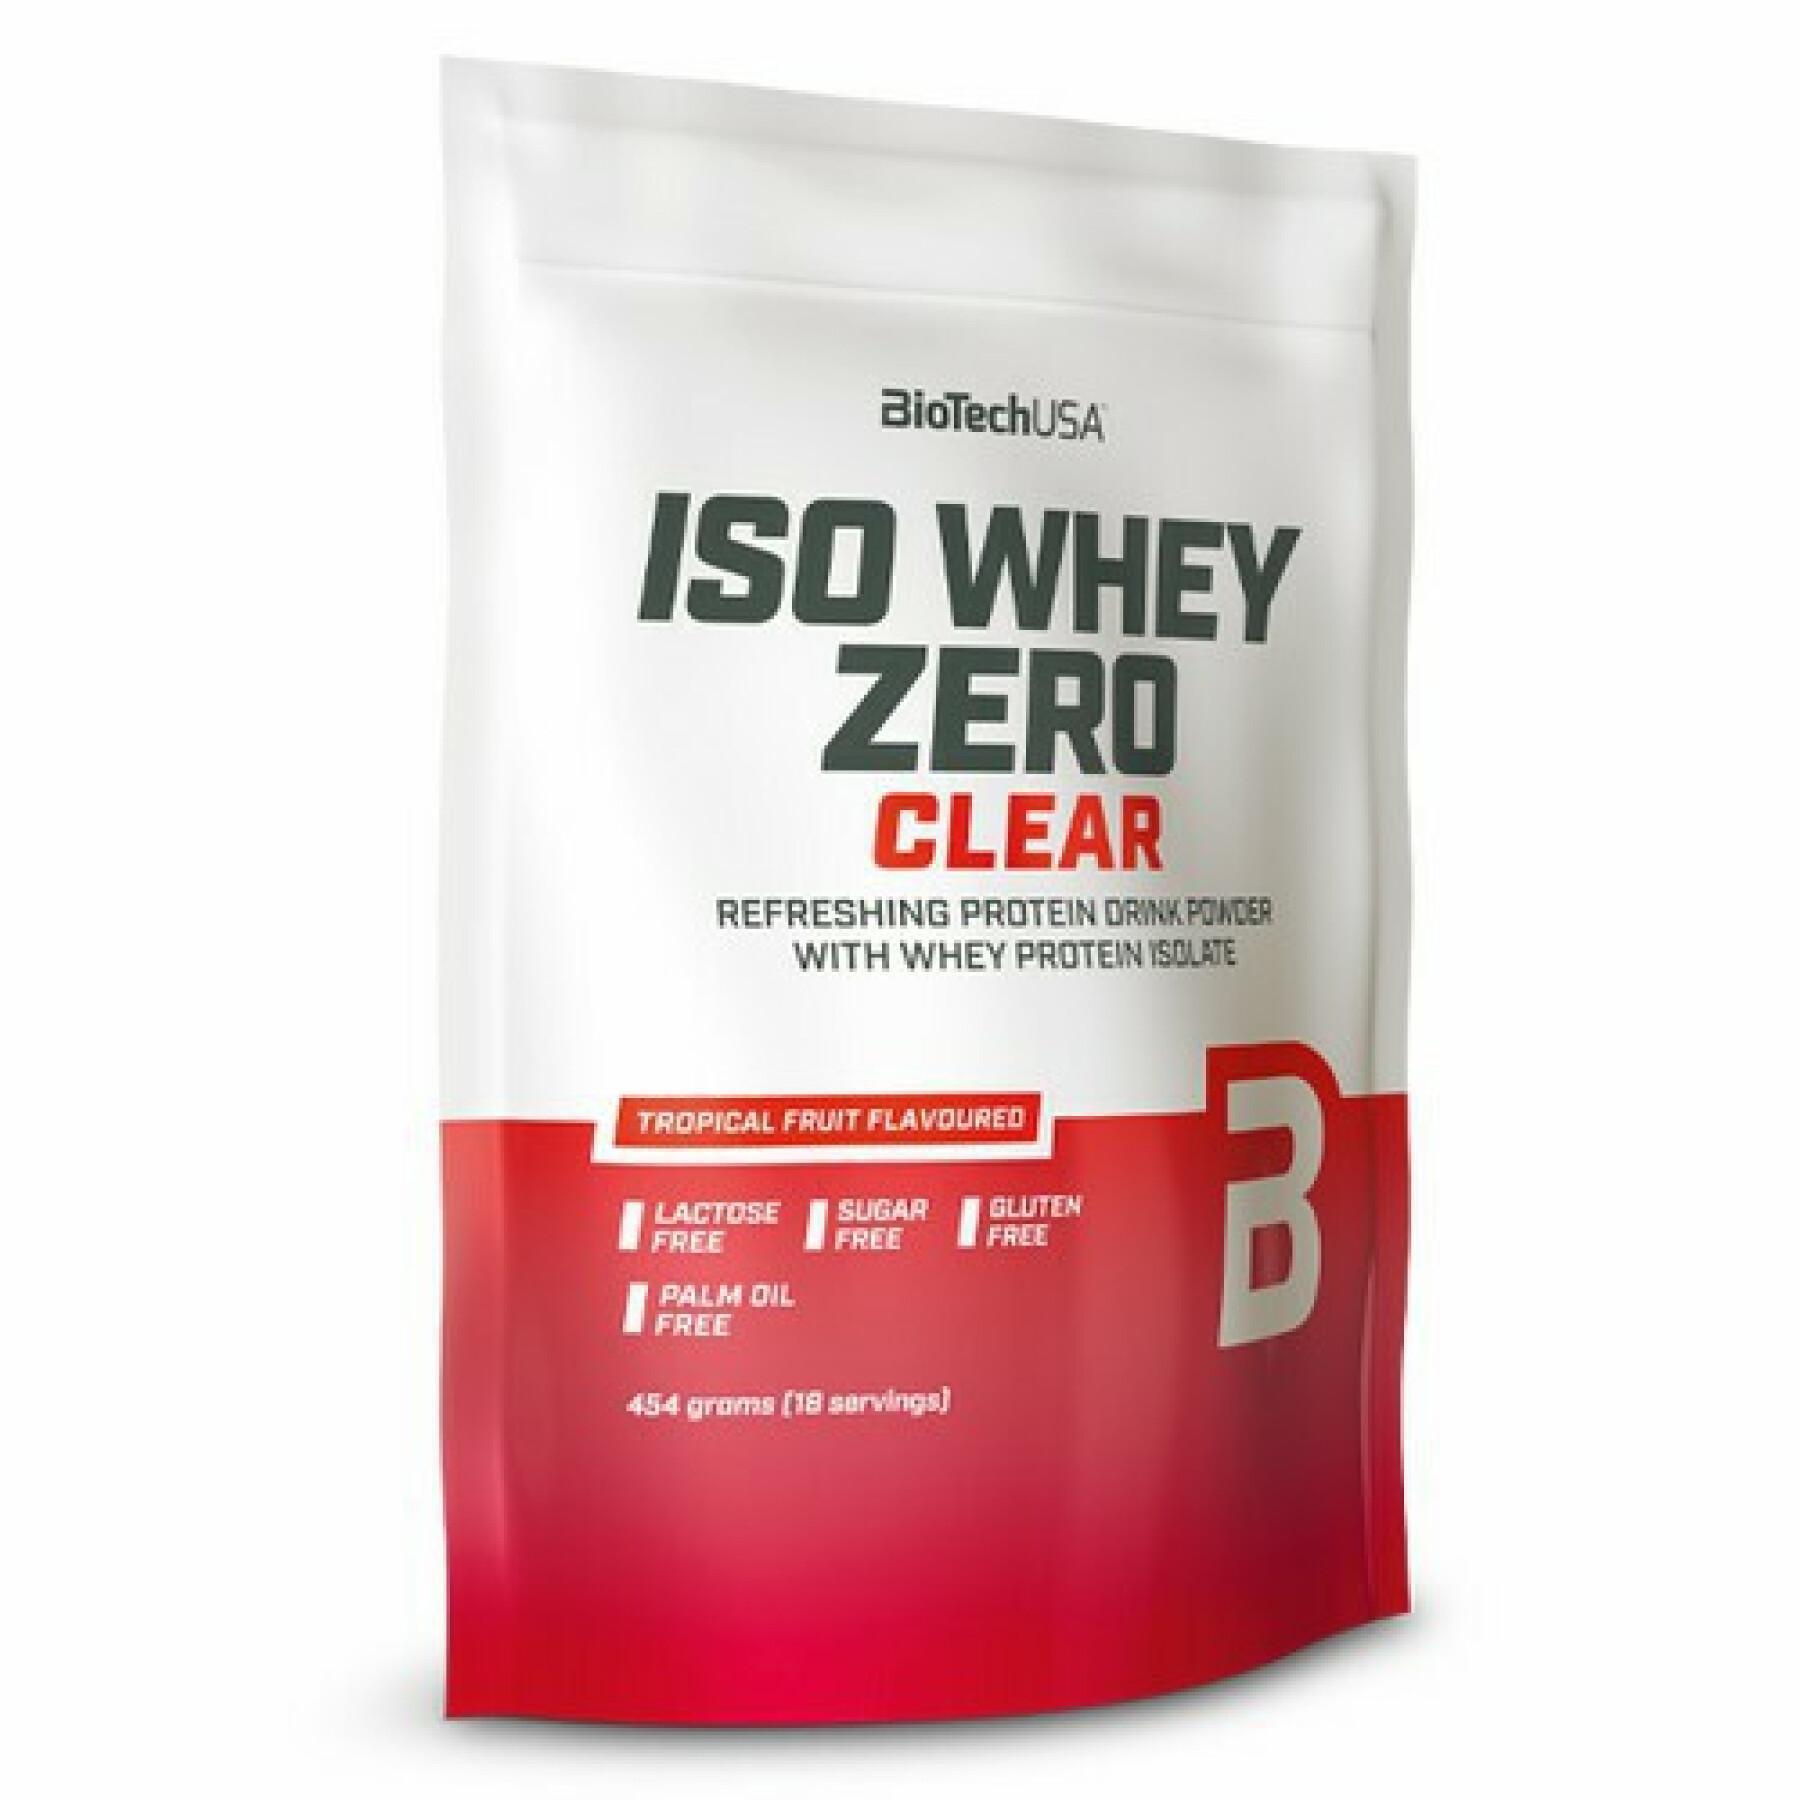 Packs of 10 bags of protein Biotech Usa iso whey zero clear - Fruits tropicaux 454g